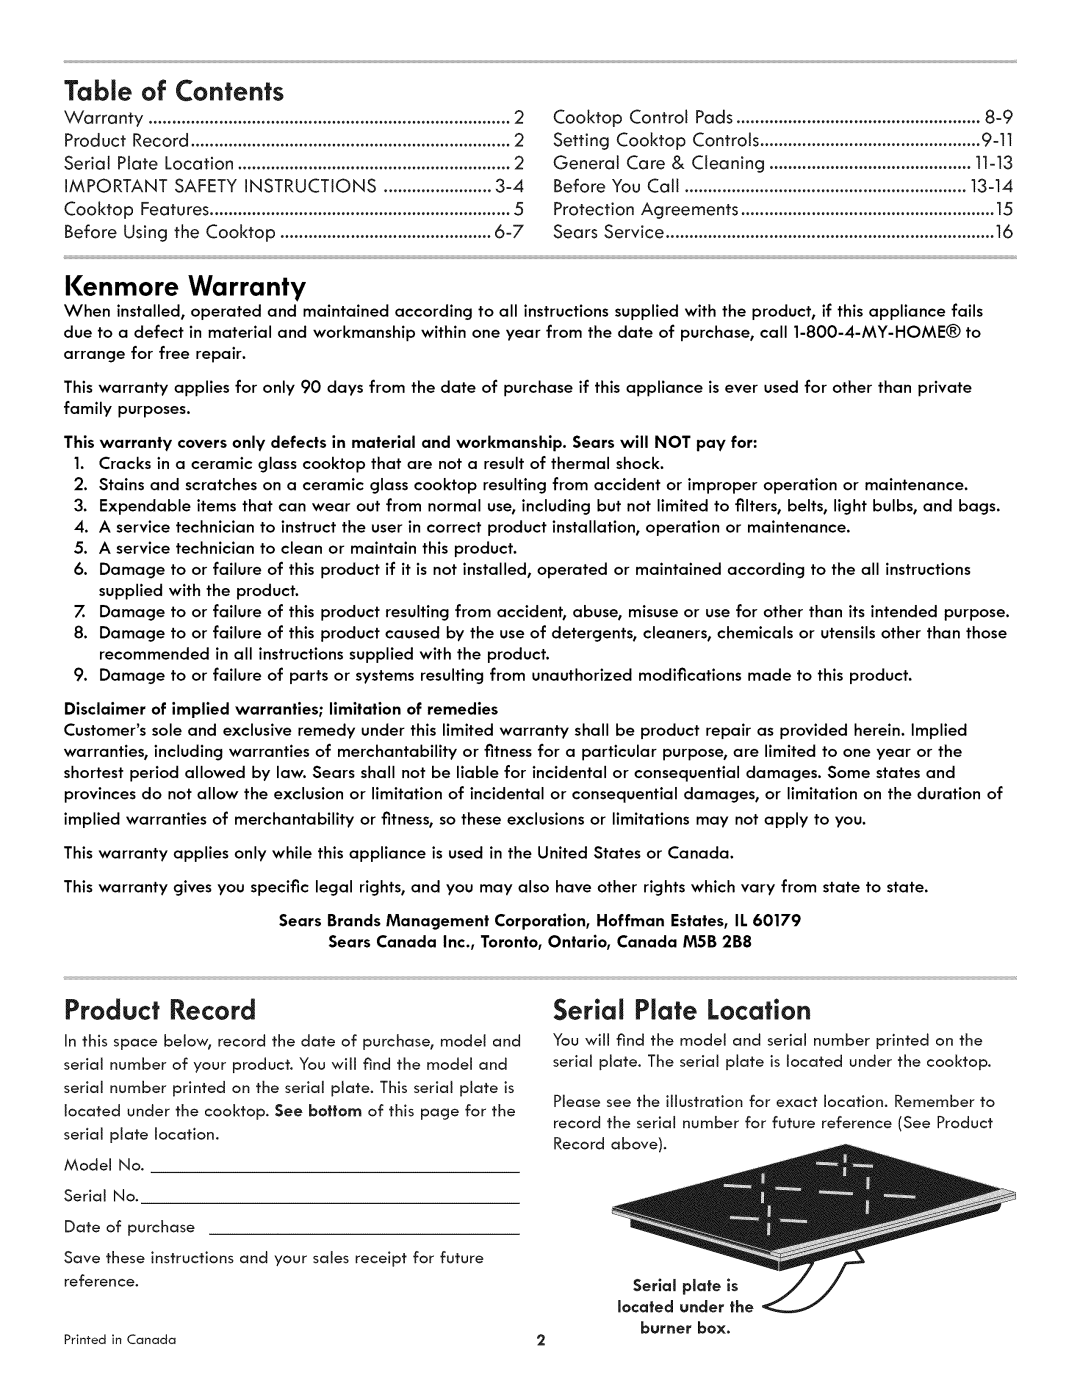 Kenmore 790.4380* manual Table of Contents, Kenmore Warranty, Product Record, Serial Plate Location 